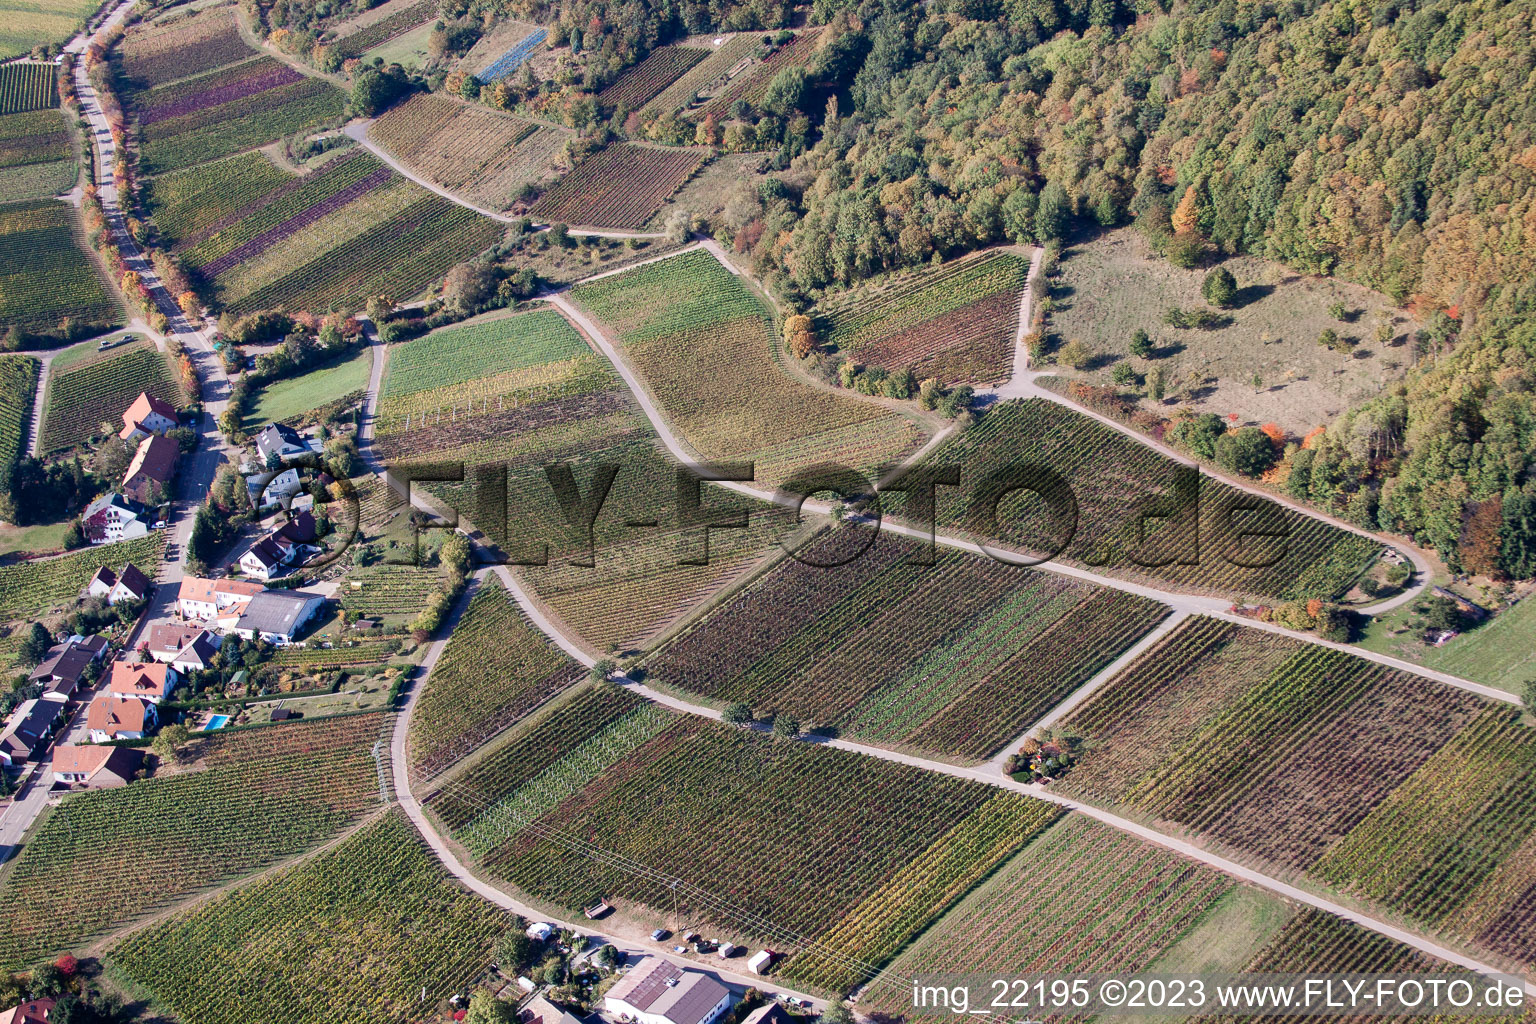 Drone image of Weyher in der Pfalz in the state Rhineland-Palatinate, Germany